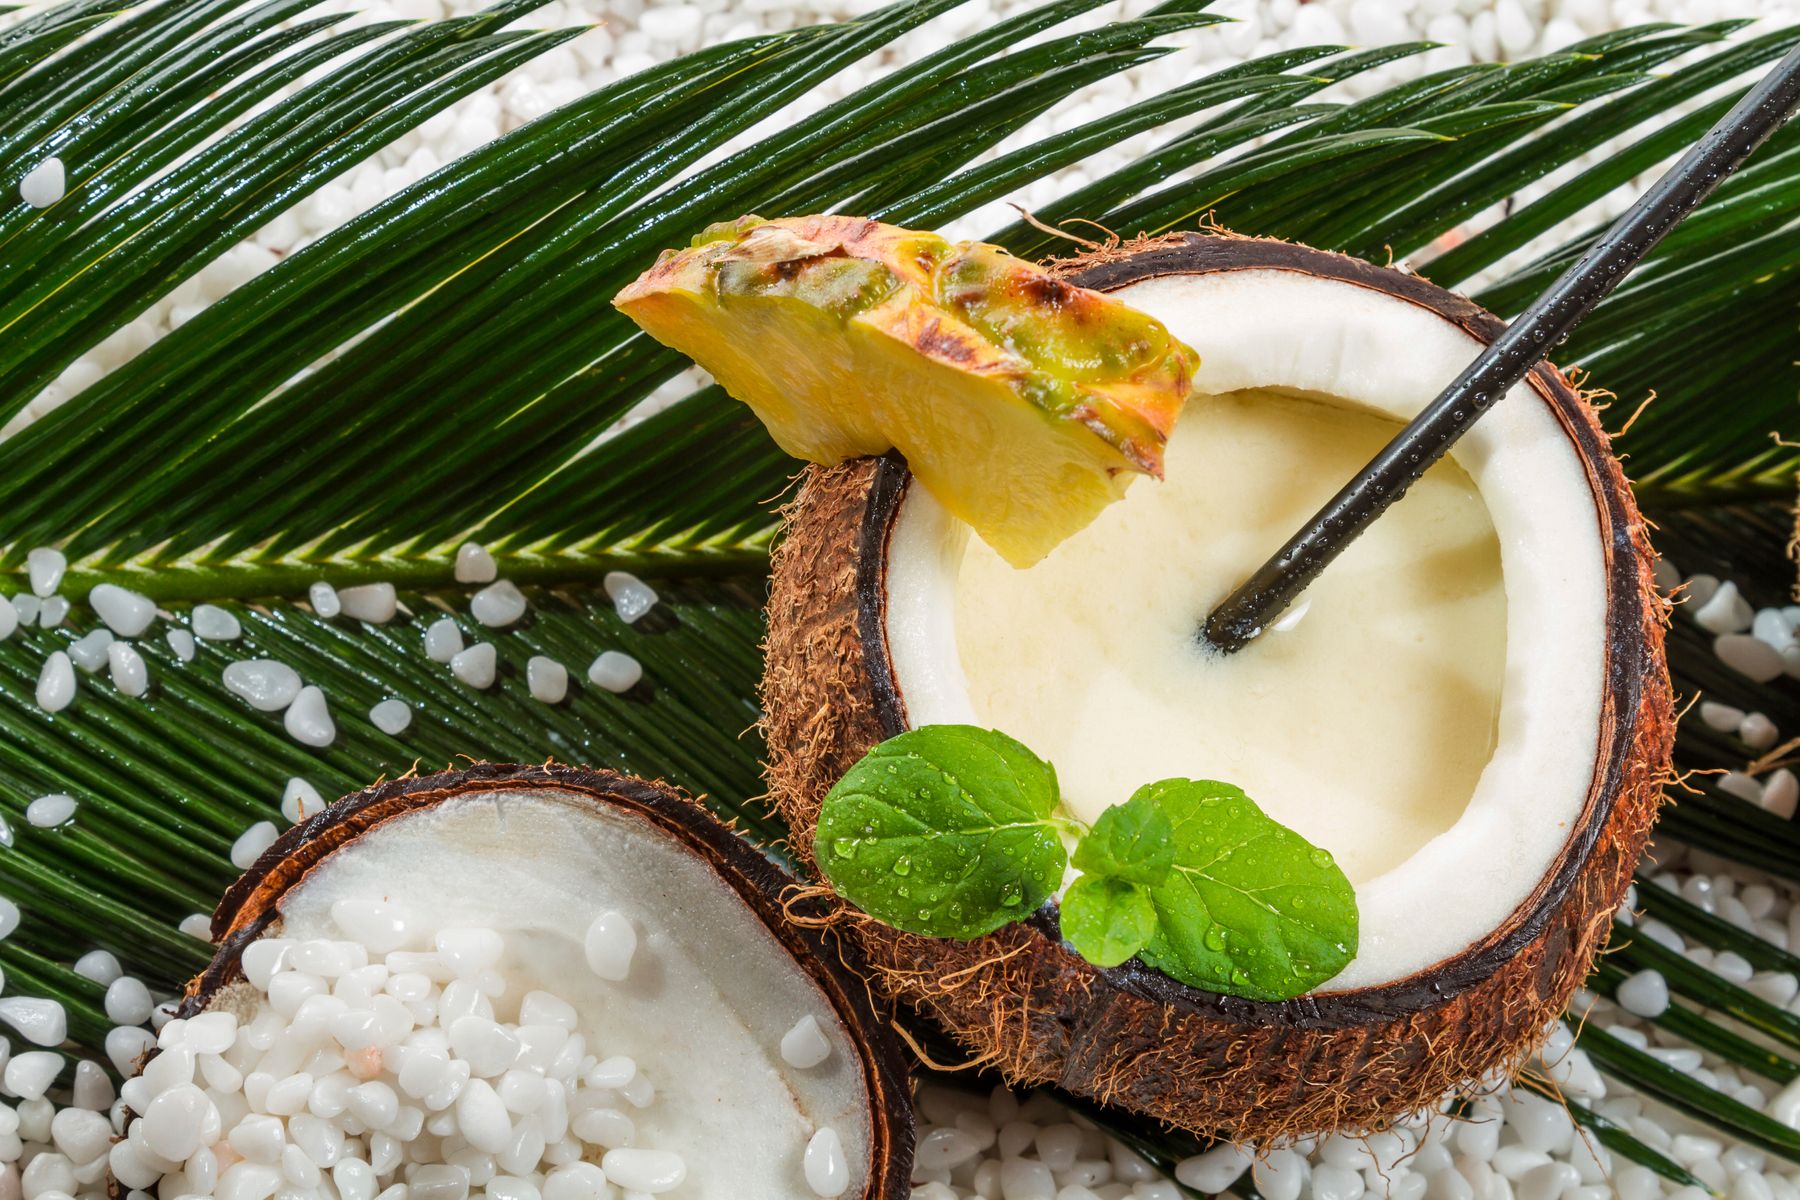 Coconut is the god of weight loss!